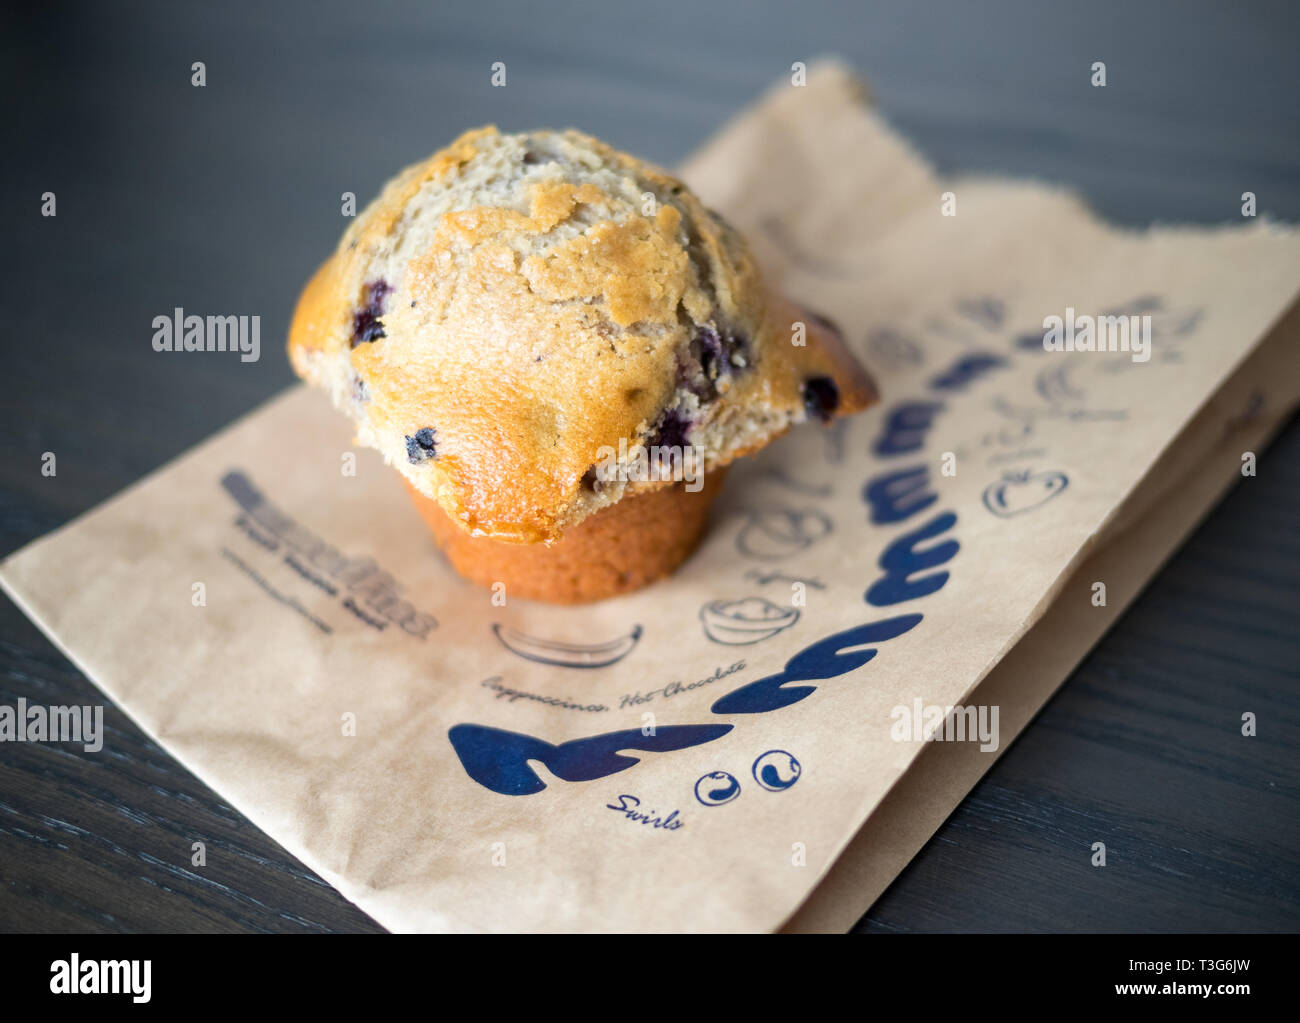 A blueberry muffin from Mmmuffins (also known as Marvellous Mmmuffins), a once popular Canadian restaurant chain specializing in muffins and coffee. Stock Photo